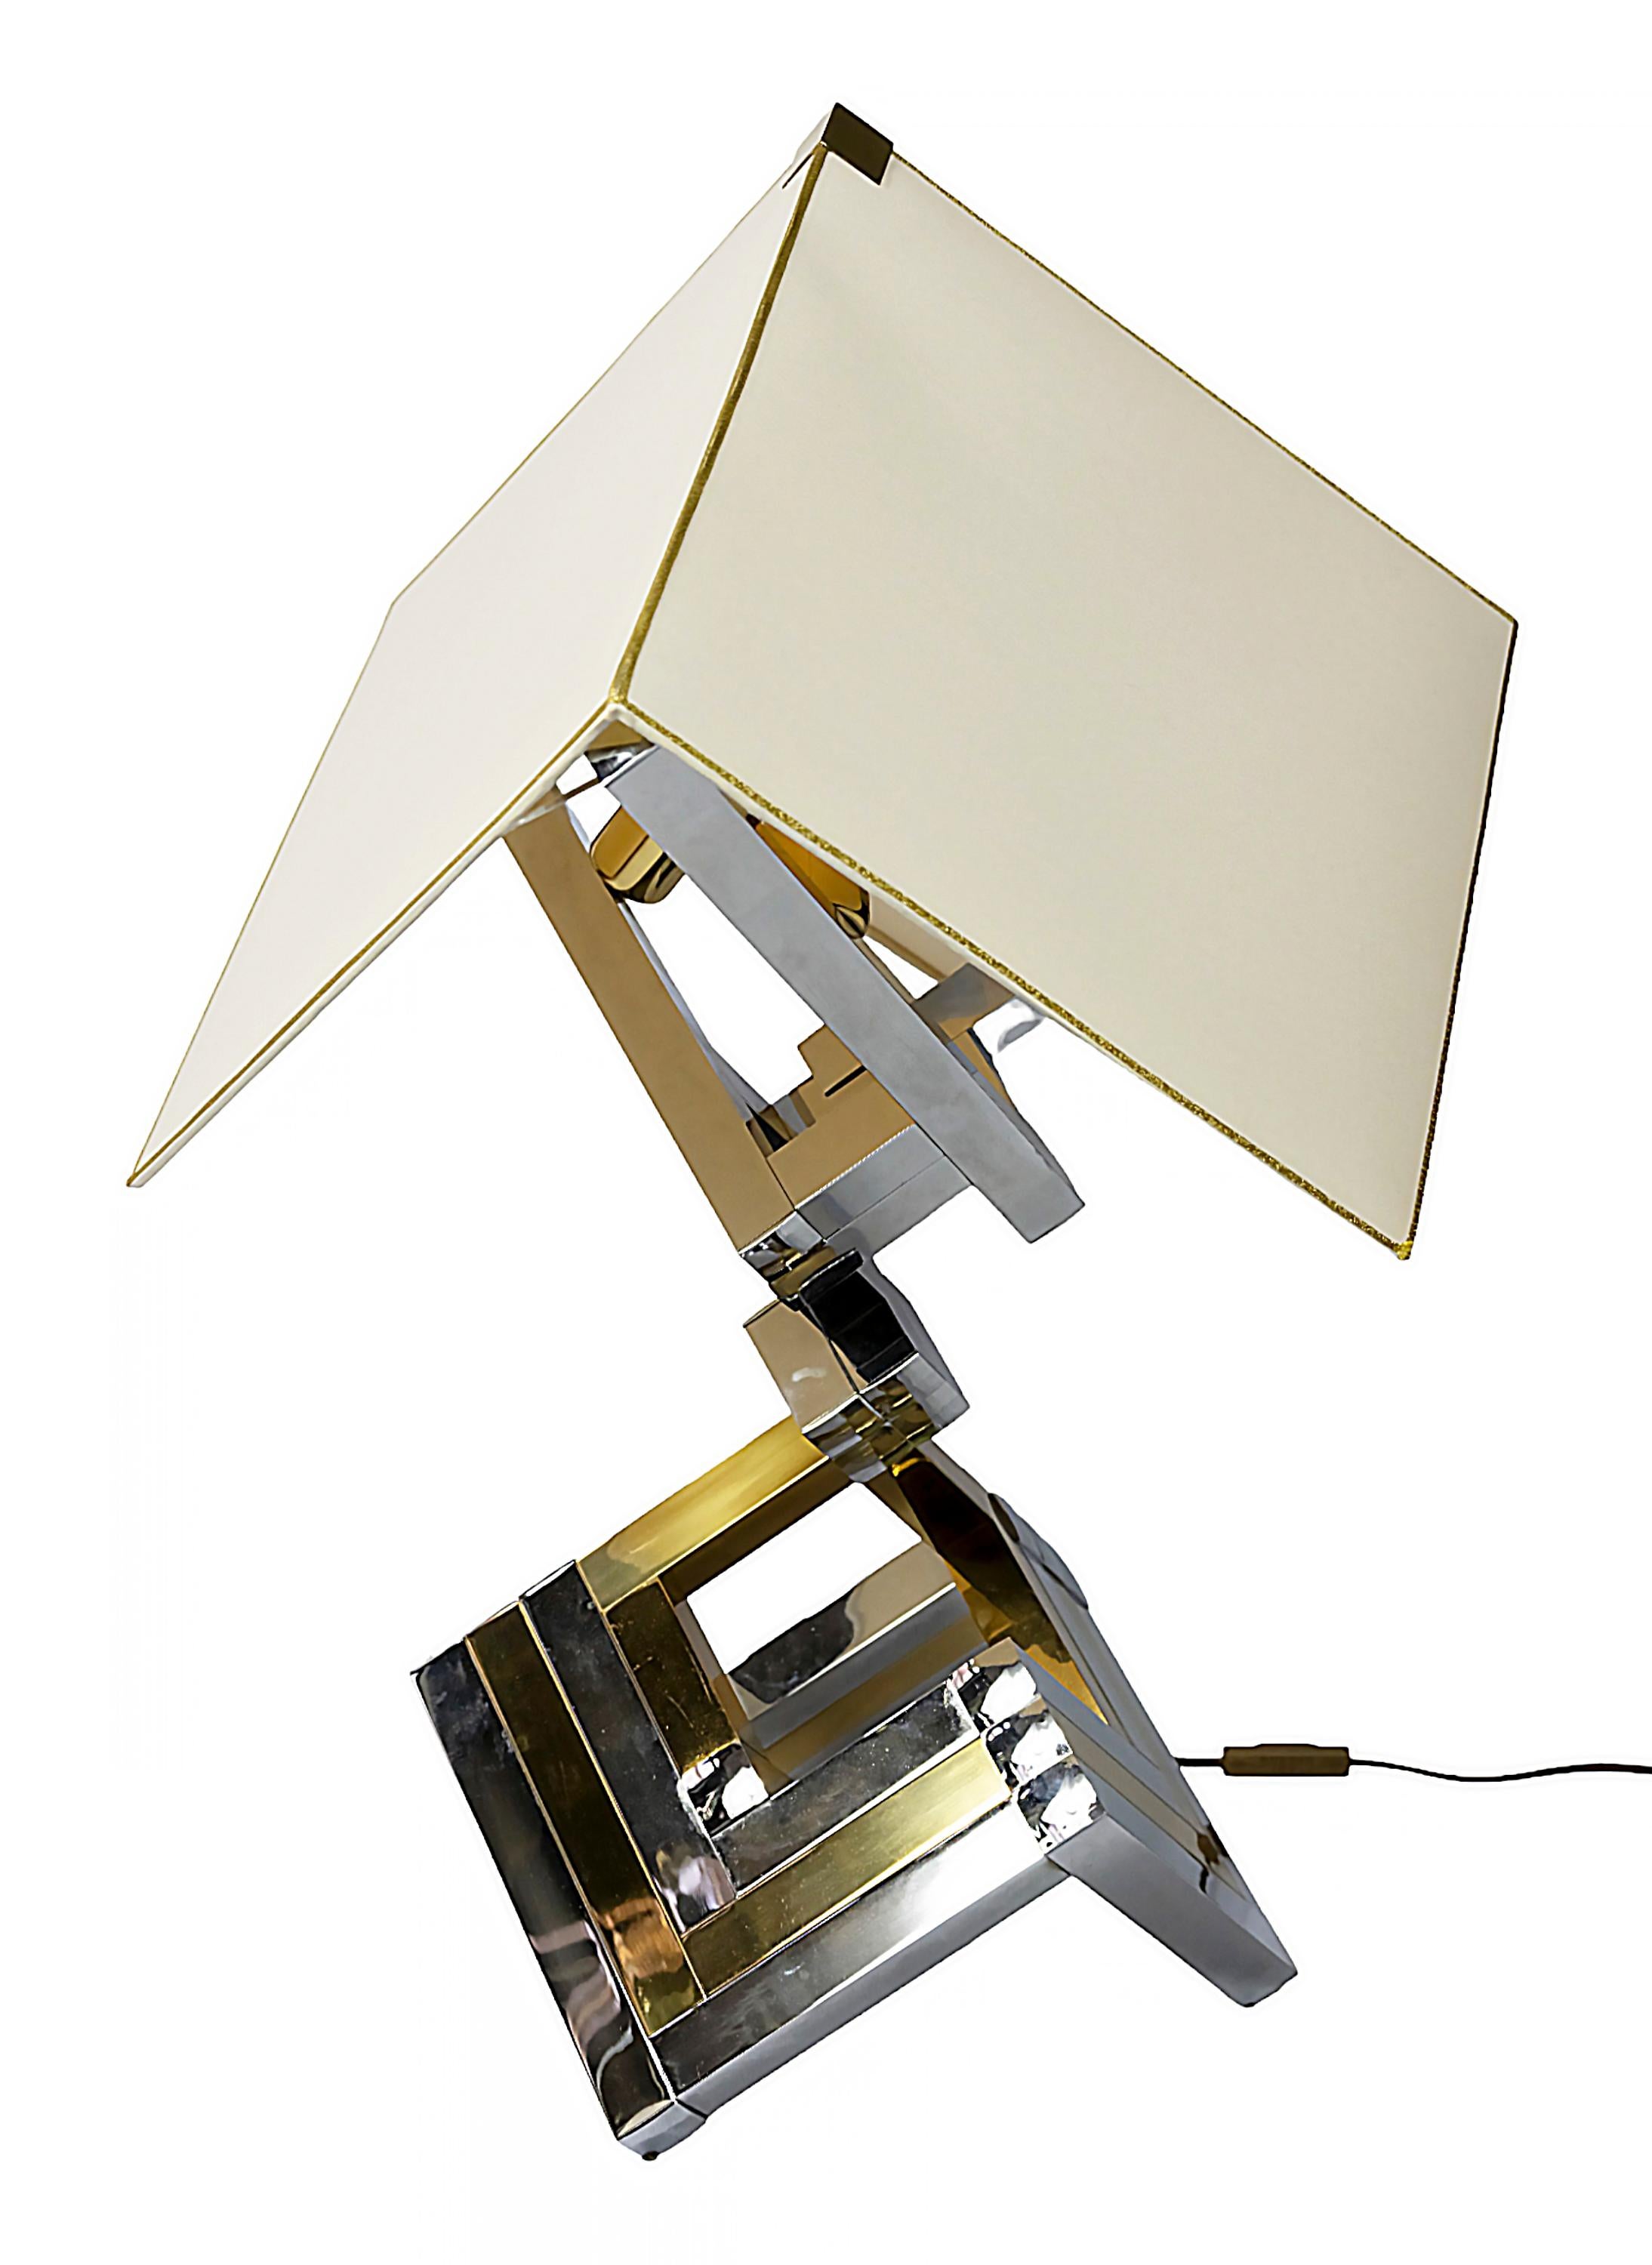 Spanish Mid-Century Willy Rizzo Table Lamp For Lumica, 1970's For Sale